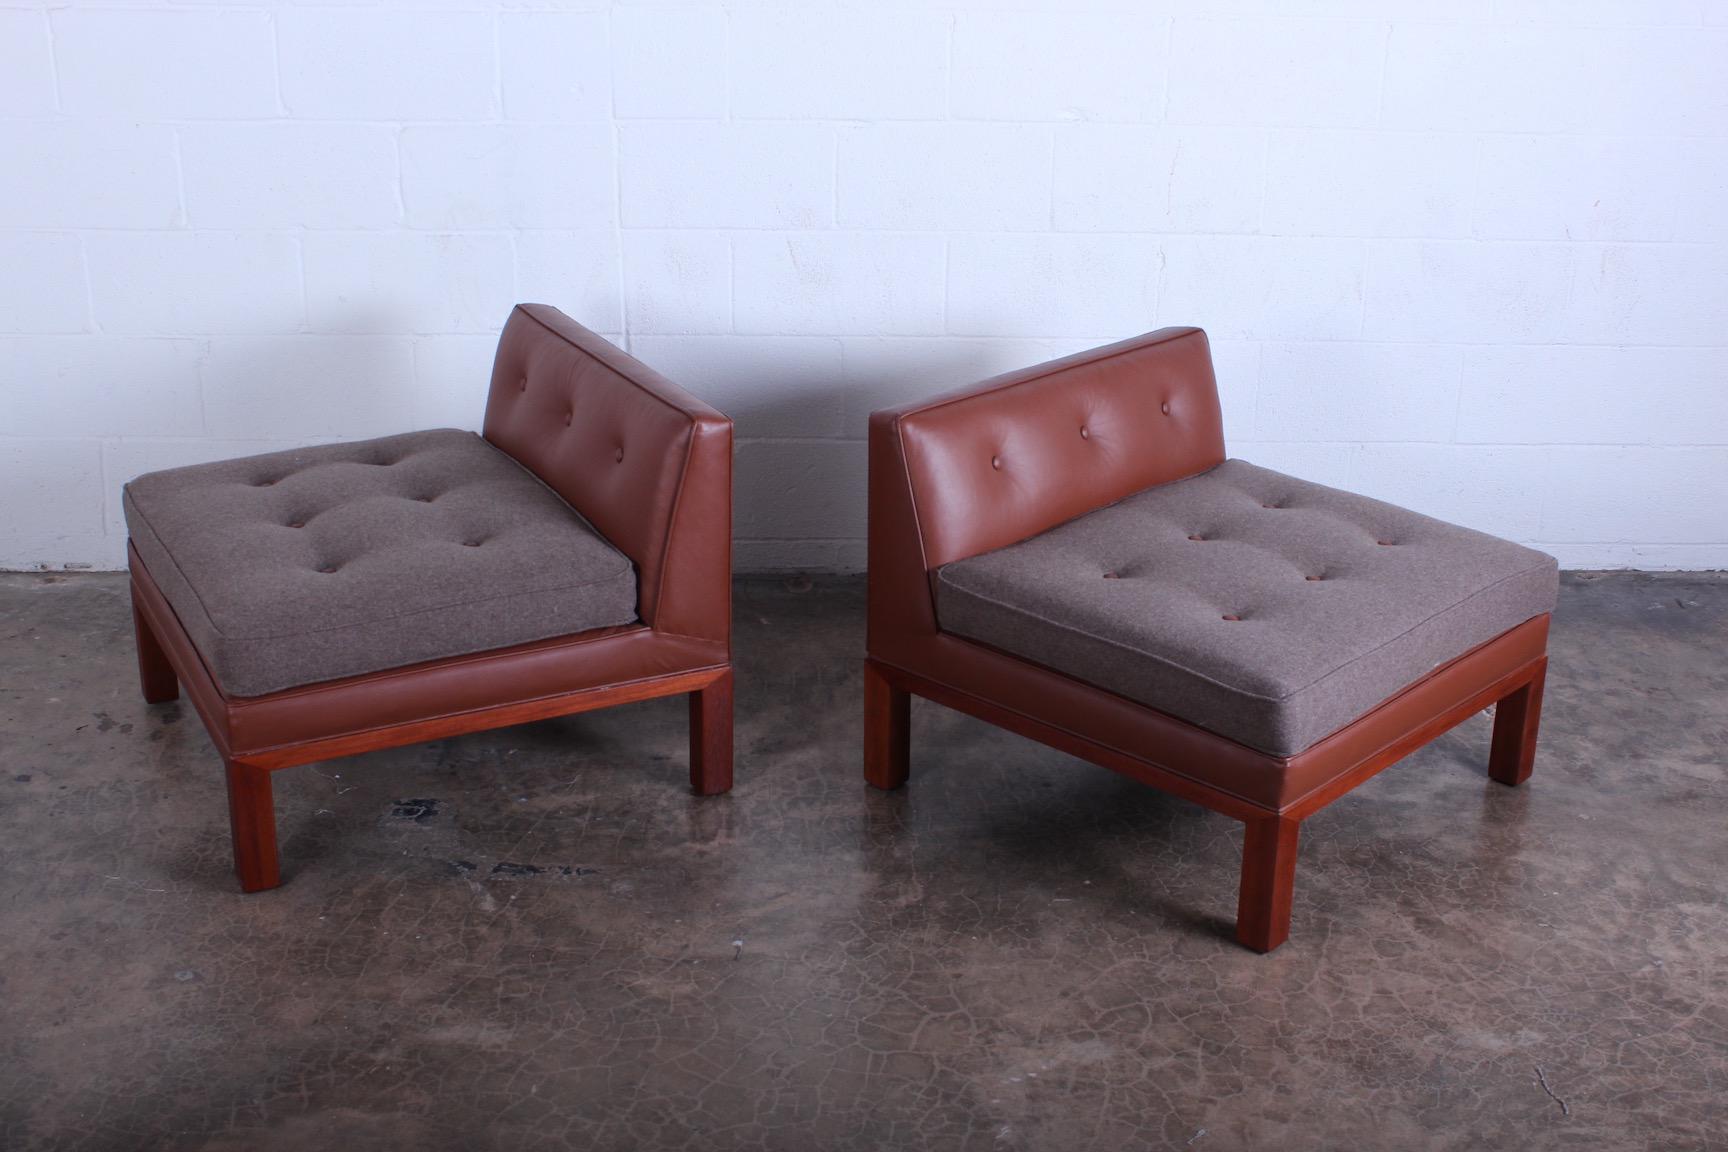 A versatile pair of slipper chairs with mahogany frames and leather/wool upholstery. Designed by Edward Wormley for Dunbar.